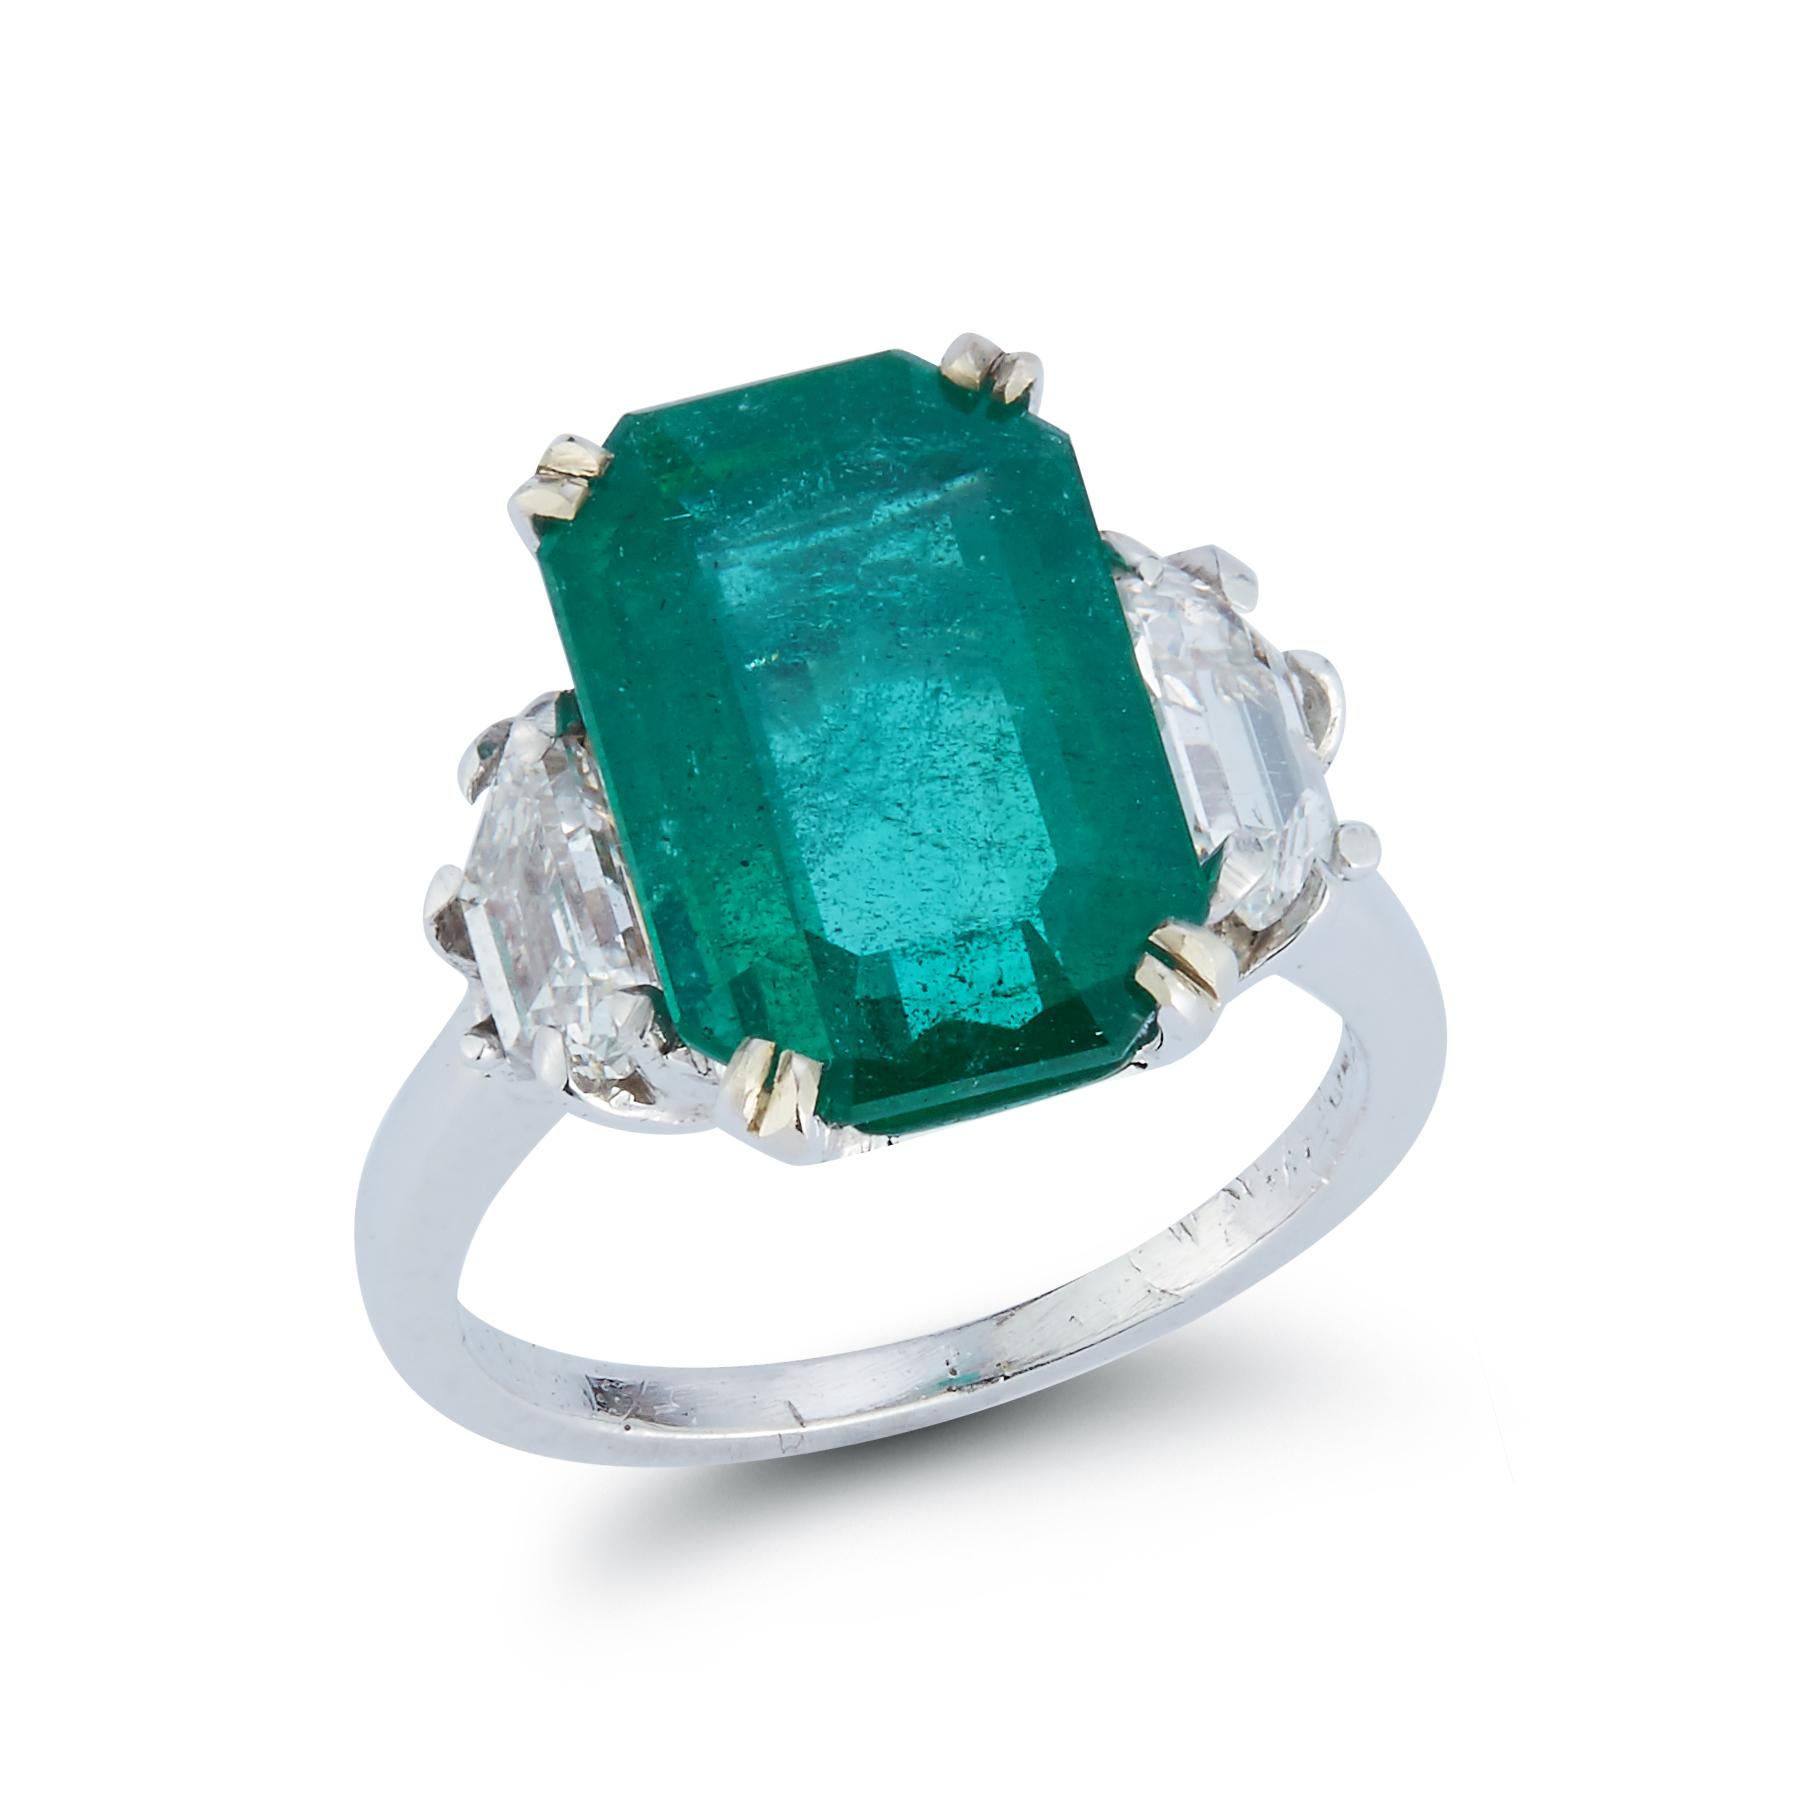 Emerald & Diamond Three Stone Cocktail Ring 

GIA Certified 

Octagonal Shape Step Cut Emerald approximately 4.15 cts with 2 Trapezoid Step-Cut Diamonds approximately .9 cts

Ring Size 3.75

Resizable Free of Charge

Gold Type: Platinum
